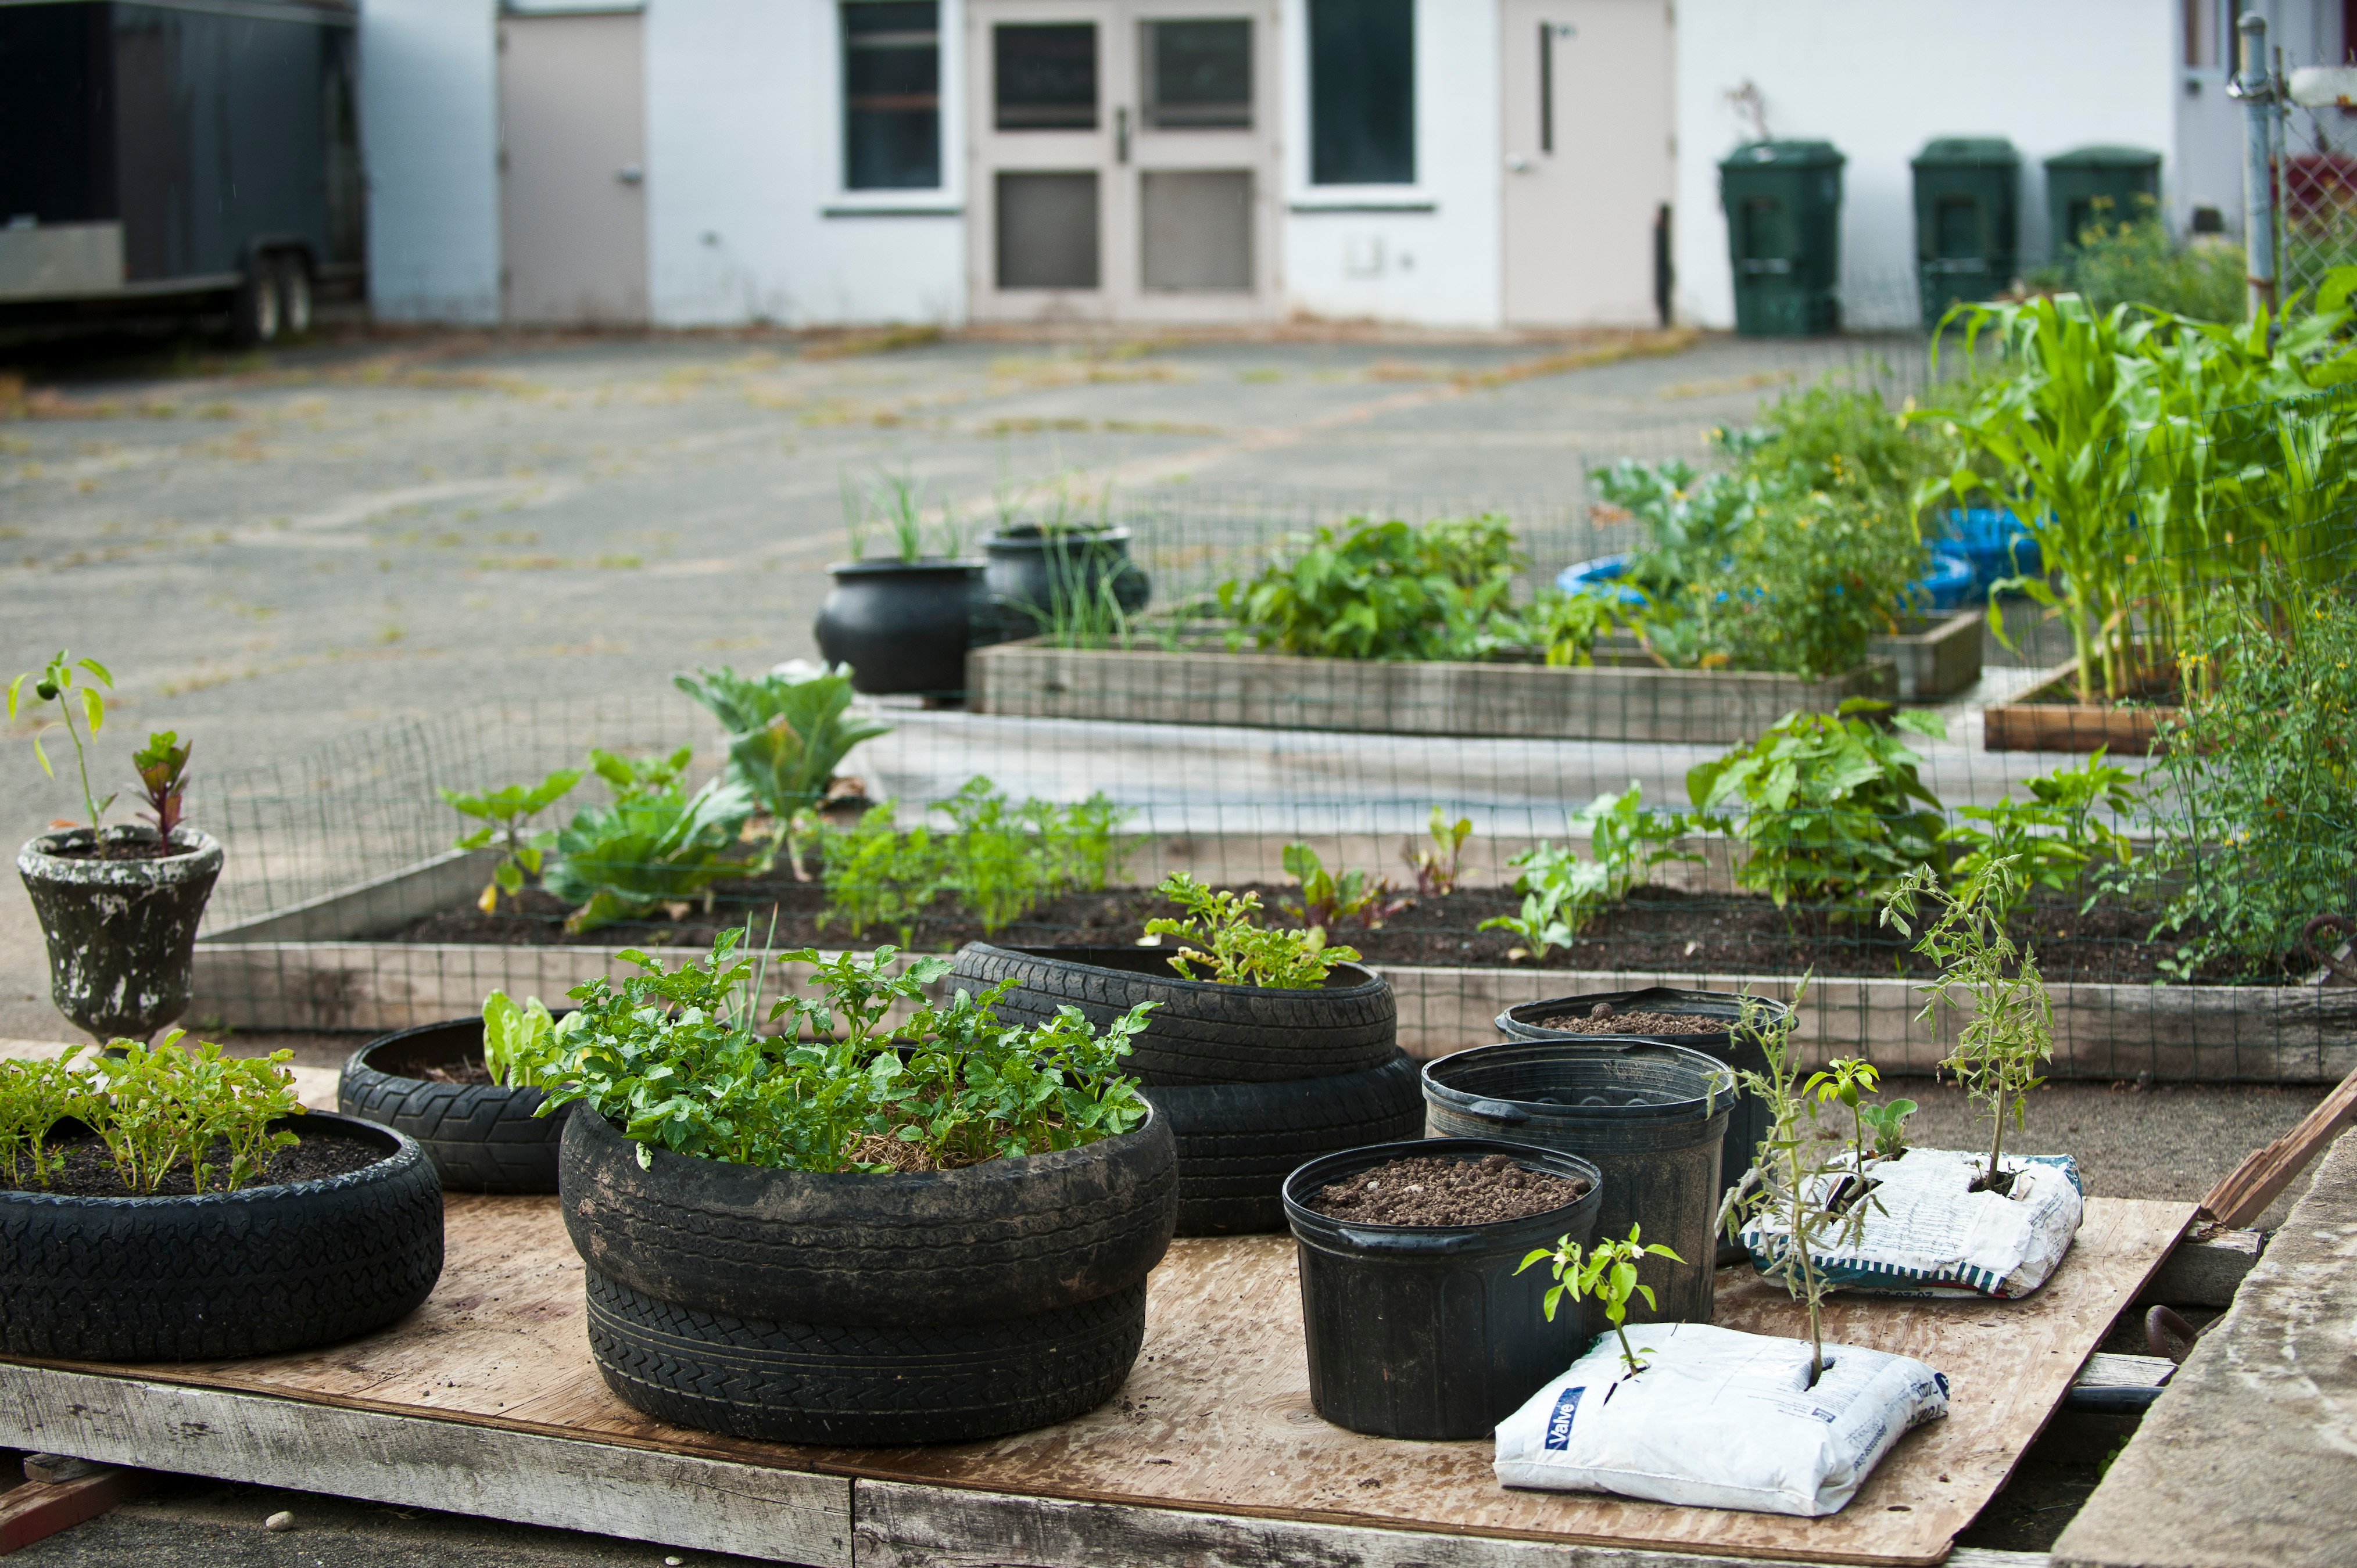 Urban Agriculture Resources